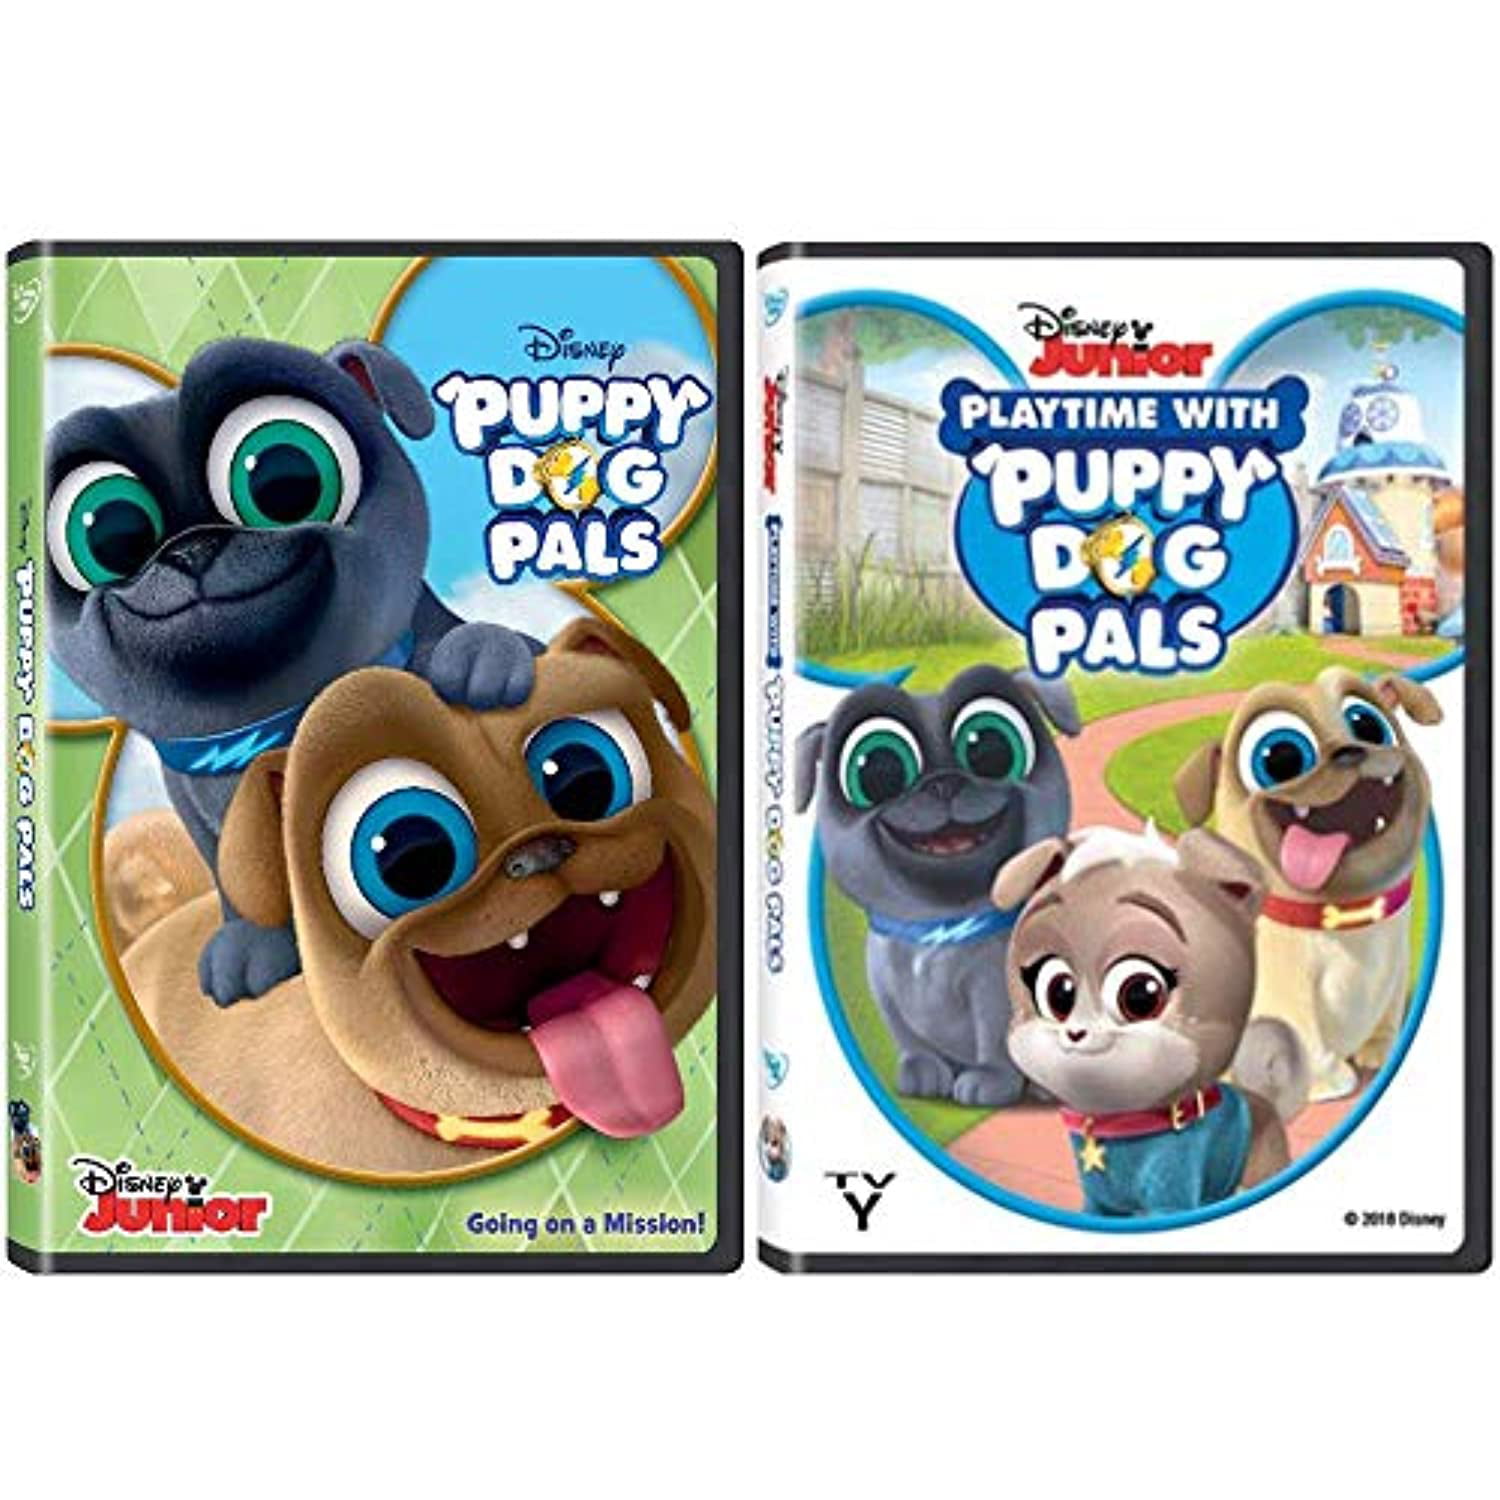 Puppy Dog Pals Collection: Going On A Mission + Playtime - Tv Episodes +  Bonus Features! 